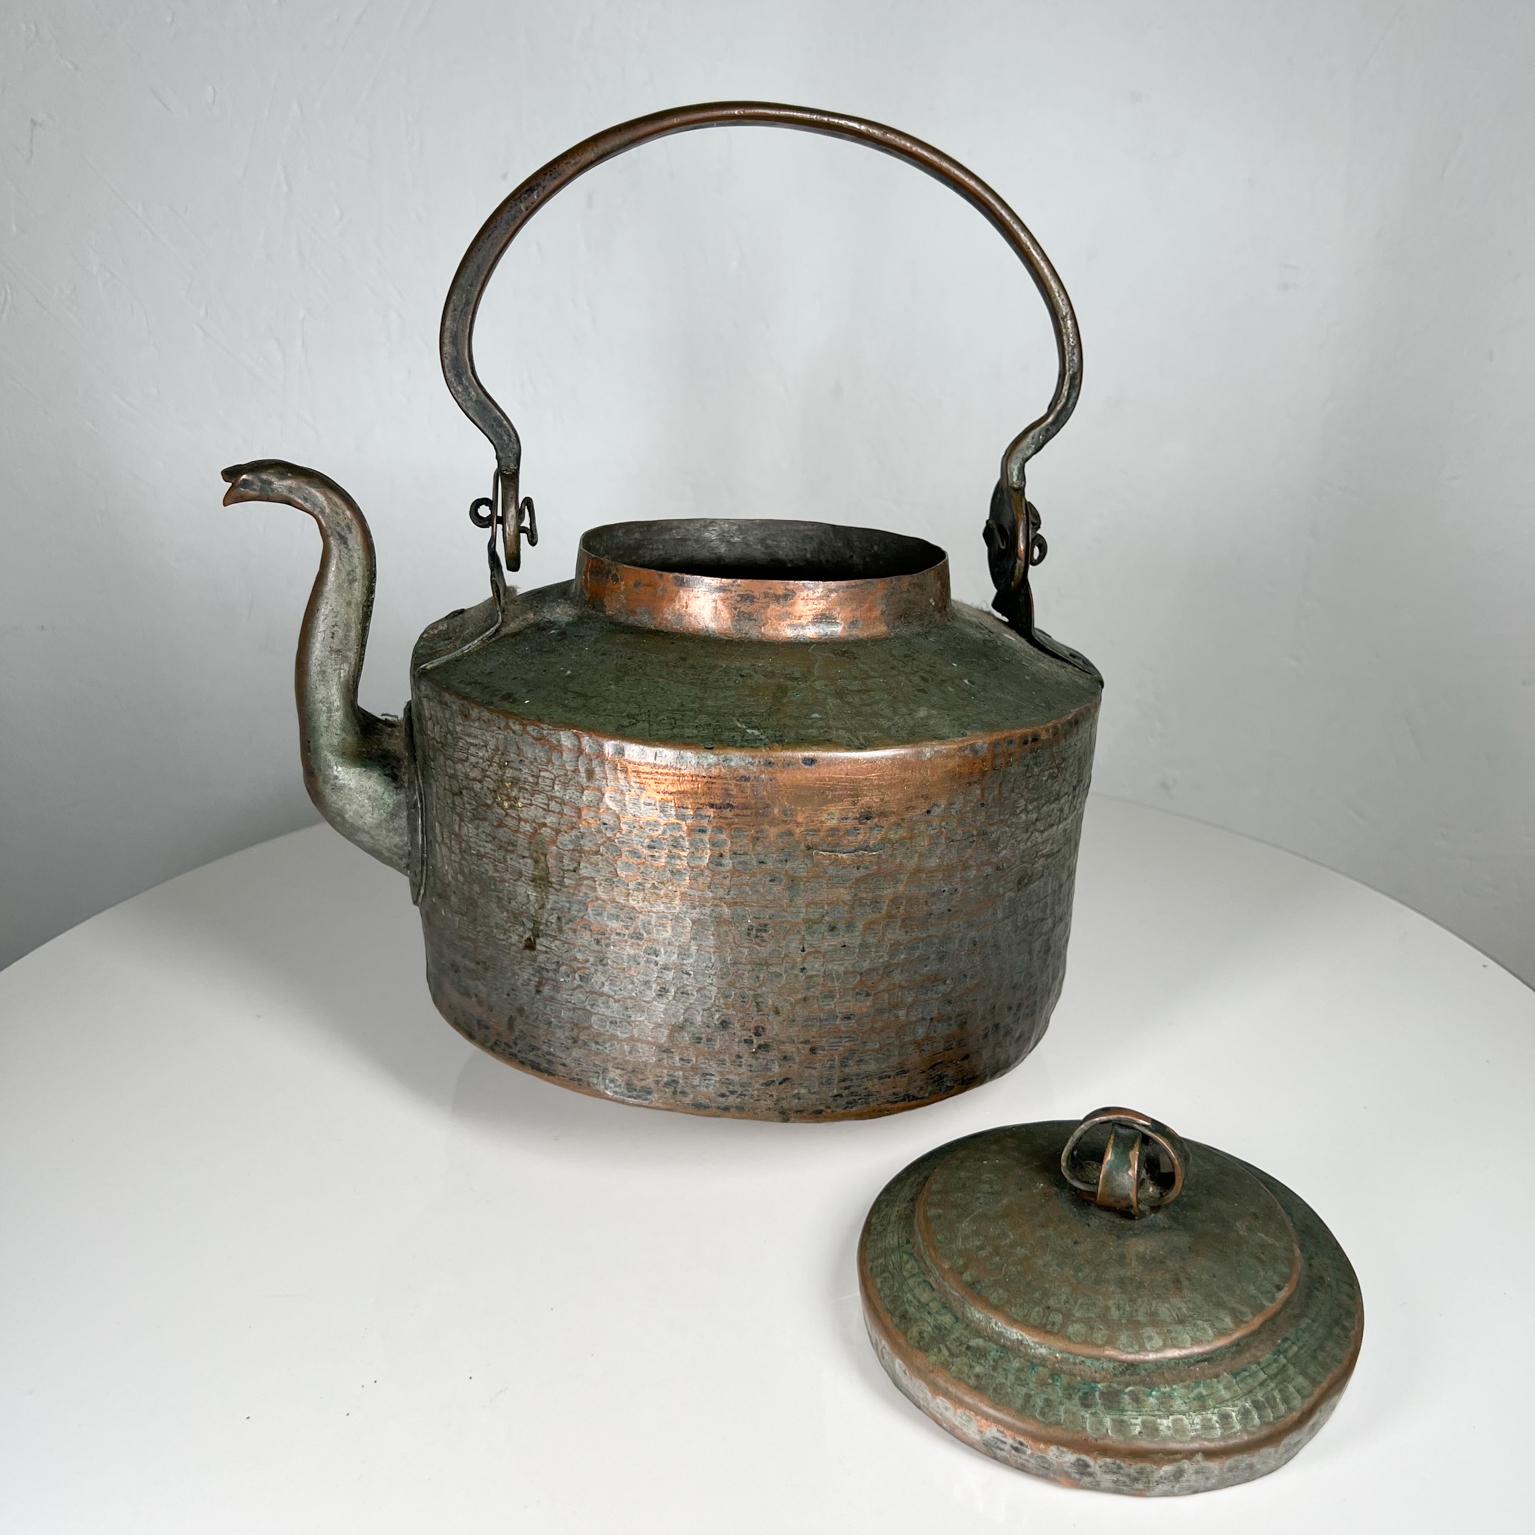 Antique Rustic Hammered Copper Tea Kettle with Flair For Sale 5